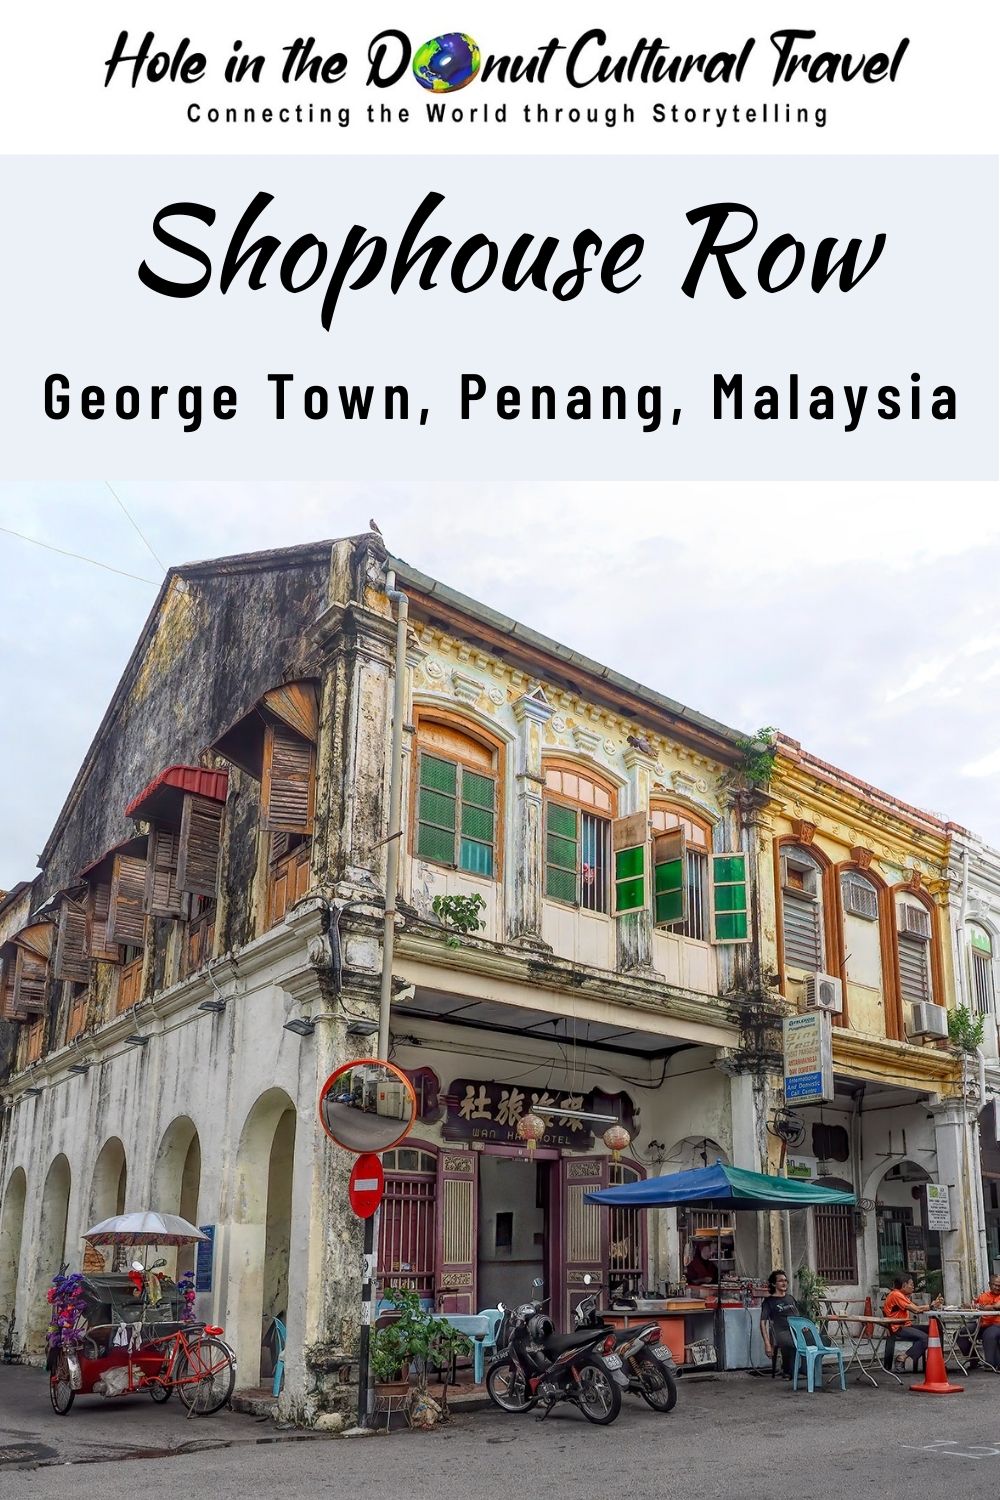 Artists from Around the World Sketch my Photo of a Traditional Penang Shophouse in Malaysia